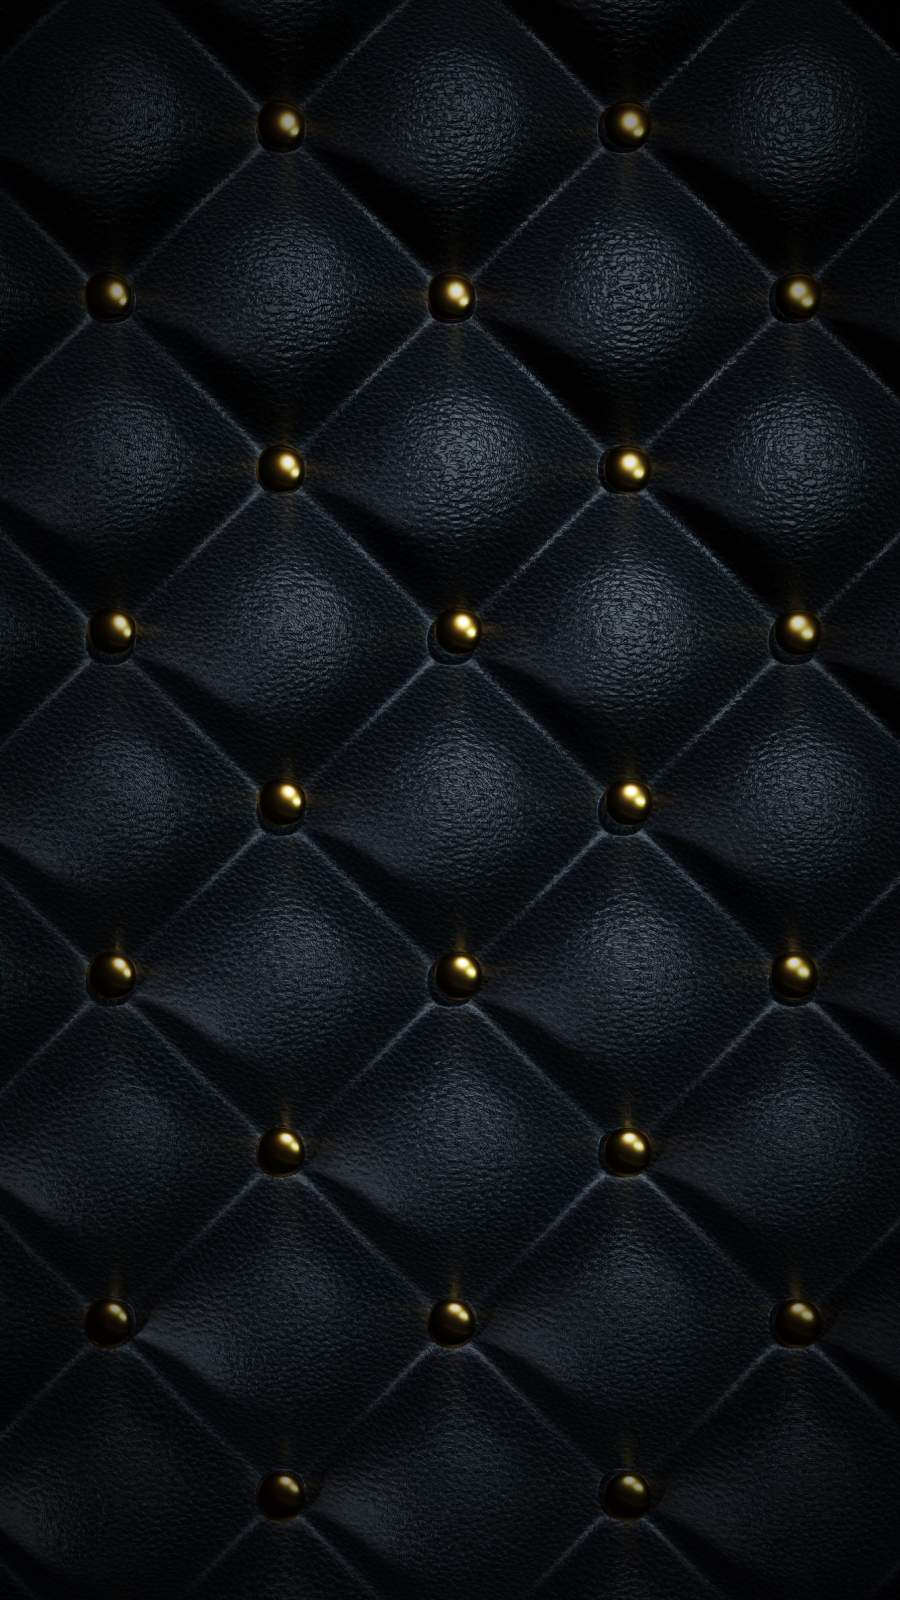 Black Leather Wallpaper for Mobile  Phones